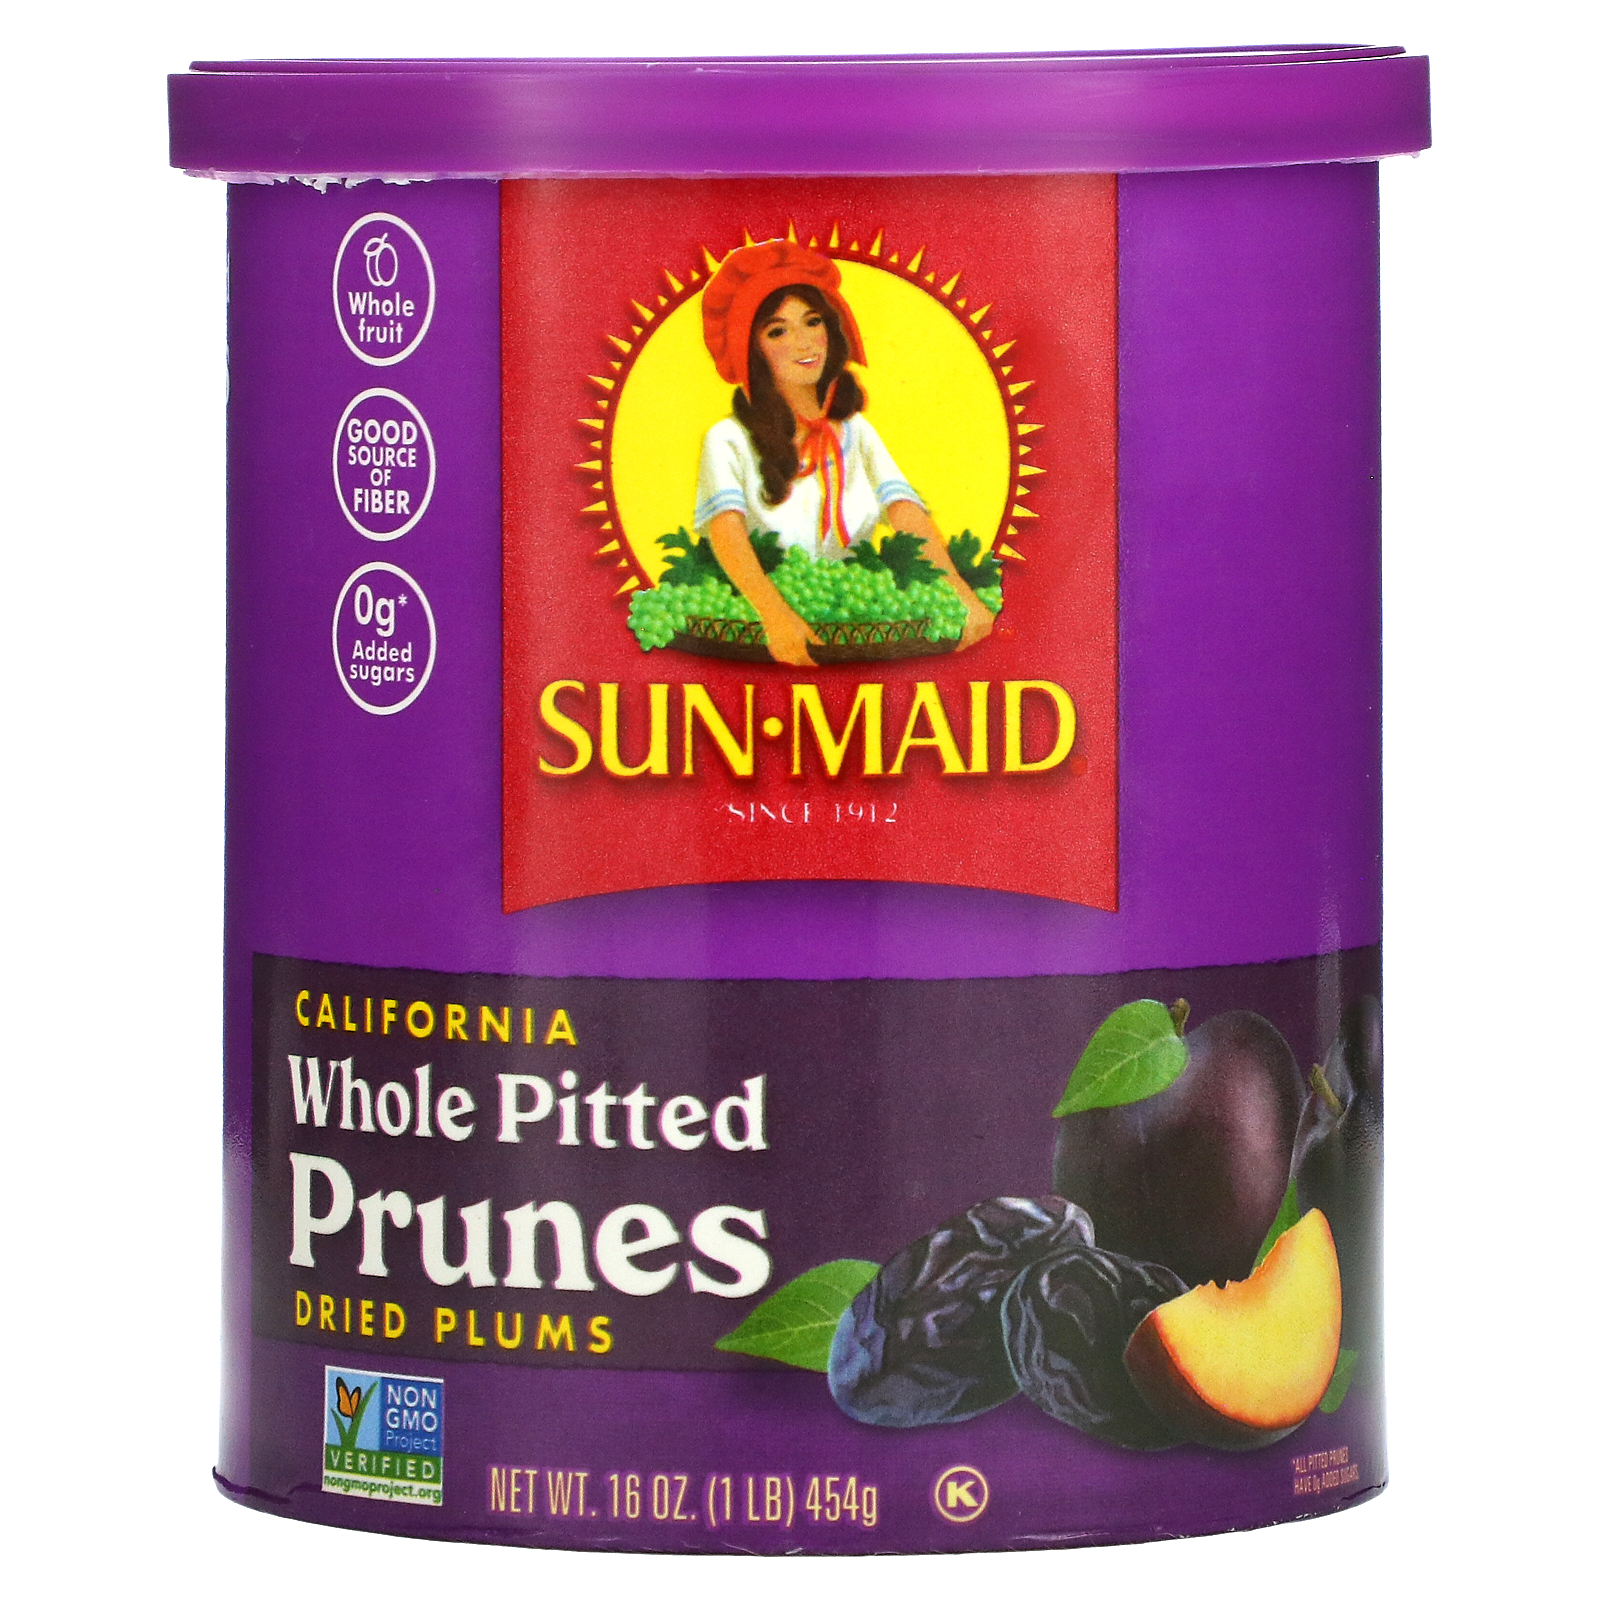 Sun-Maid California Whole Pitted 【メーカー公式ショップ】 Prunes Dried Plums oz g 16 454